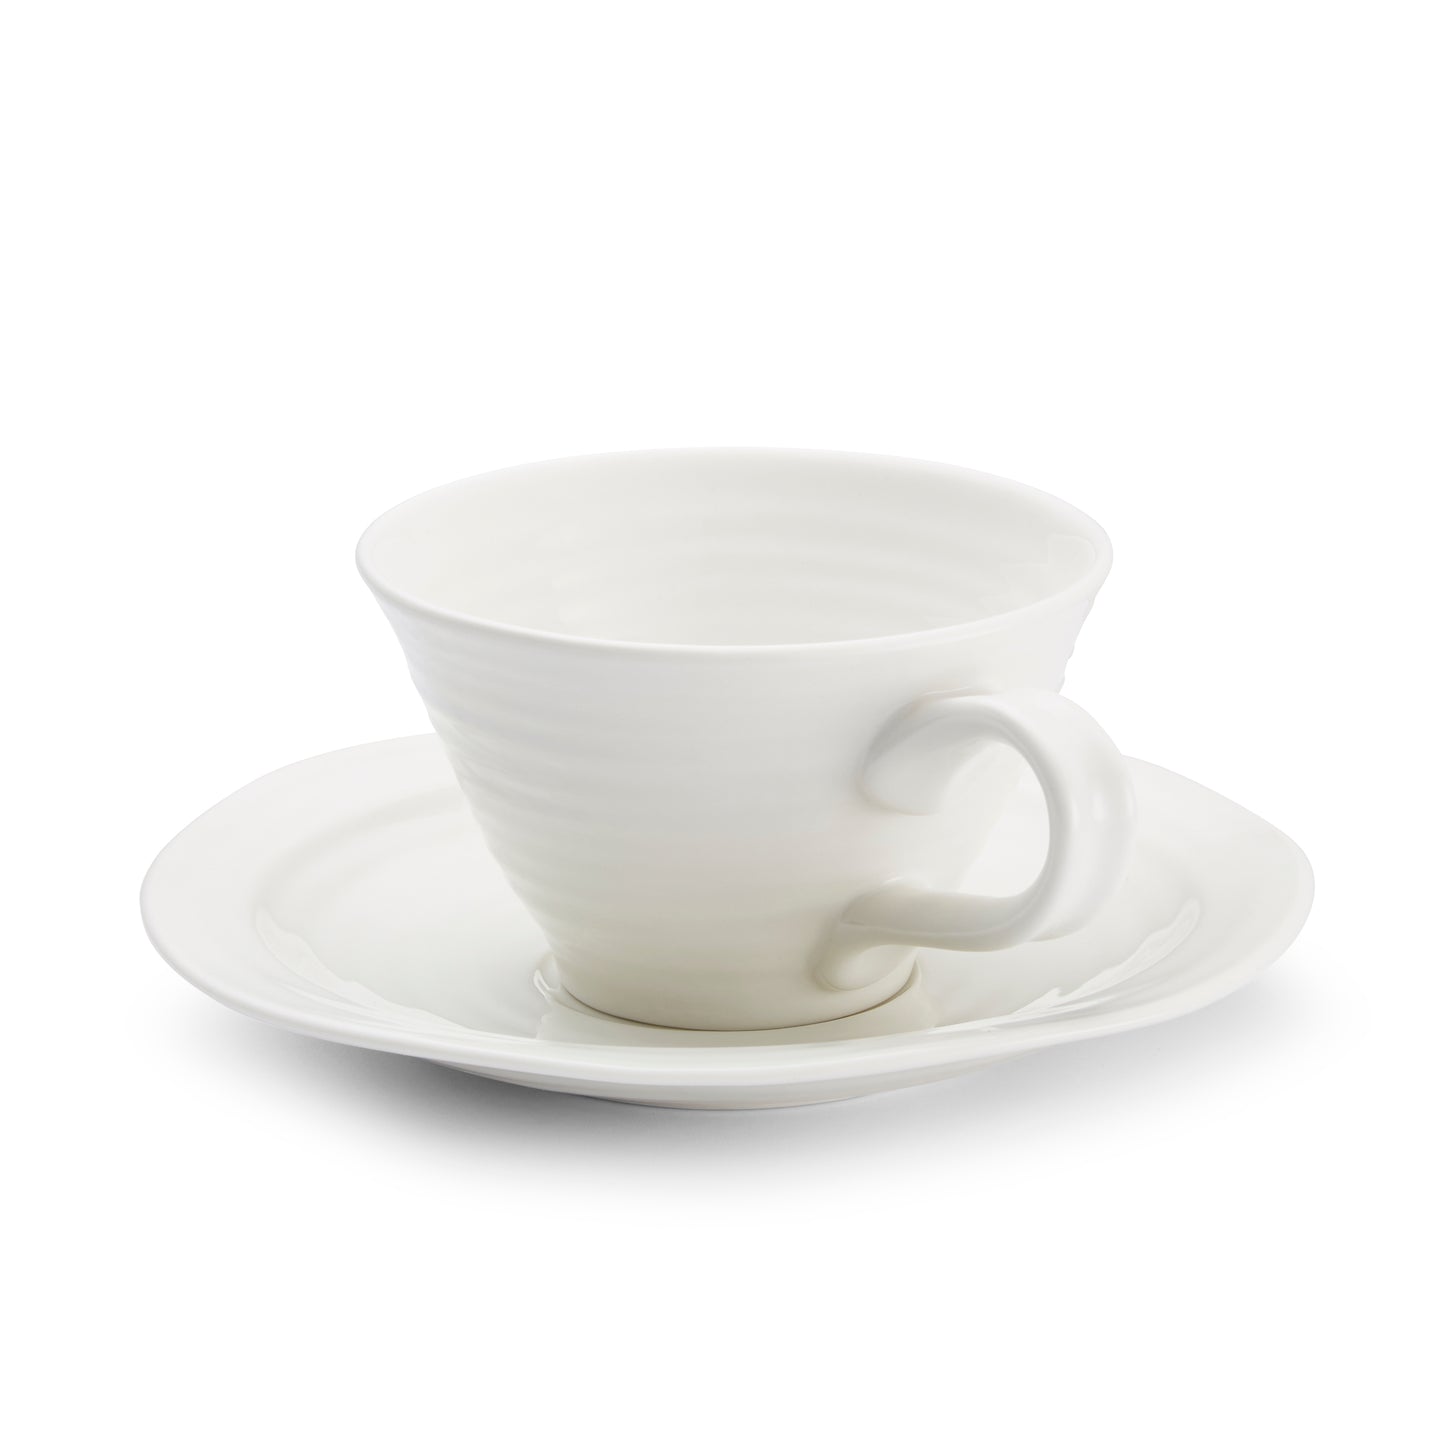 SOPHIE CONRAN Cup and Saucer - White